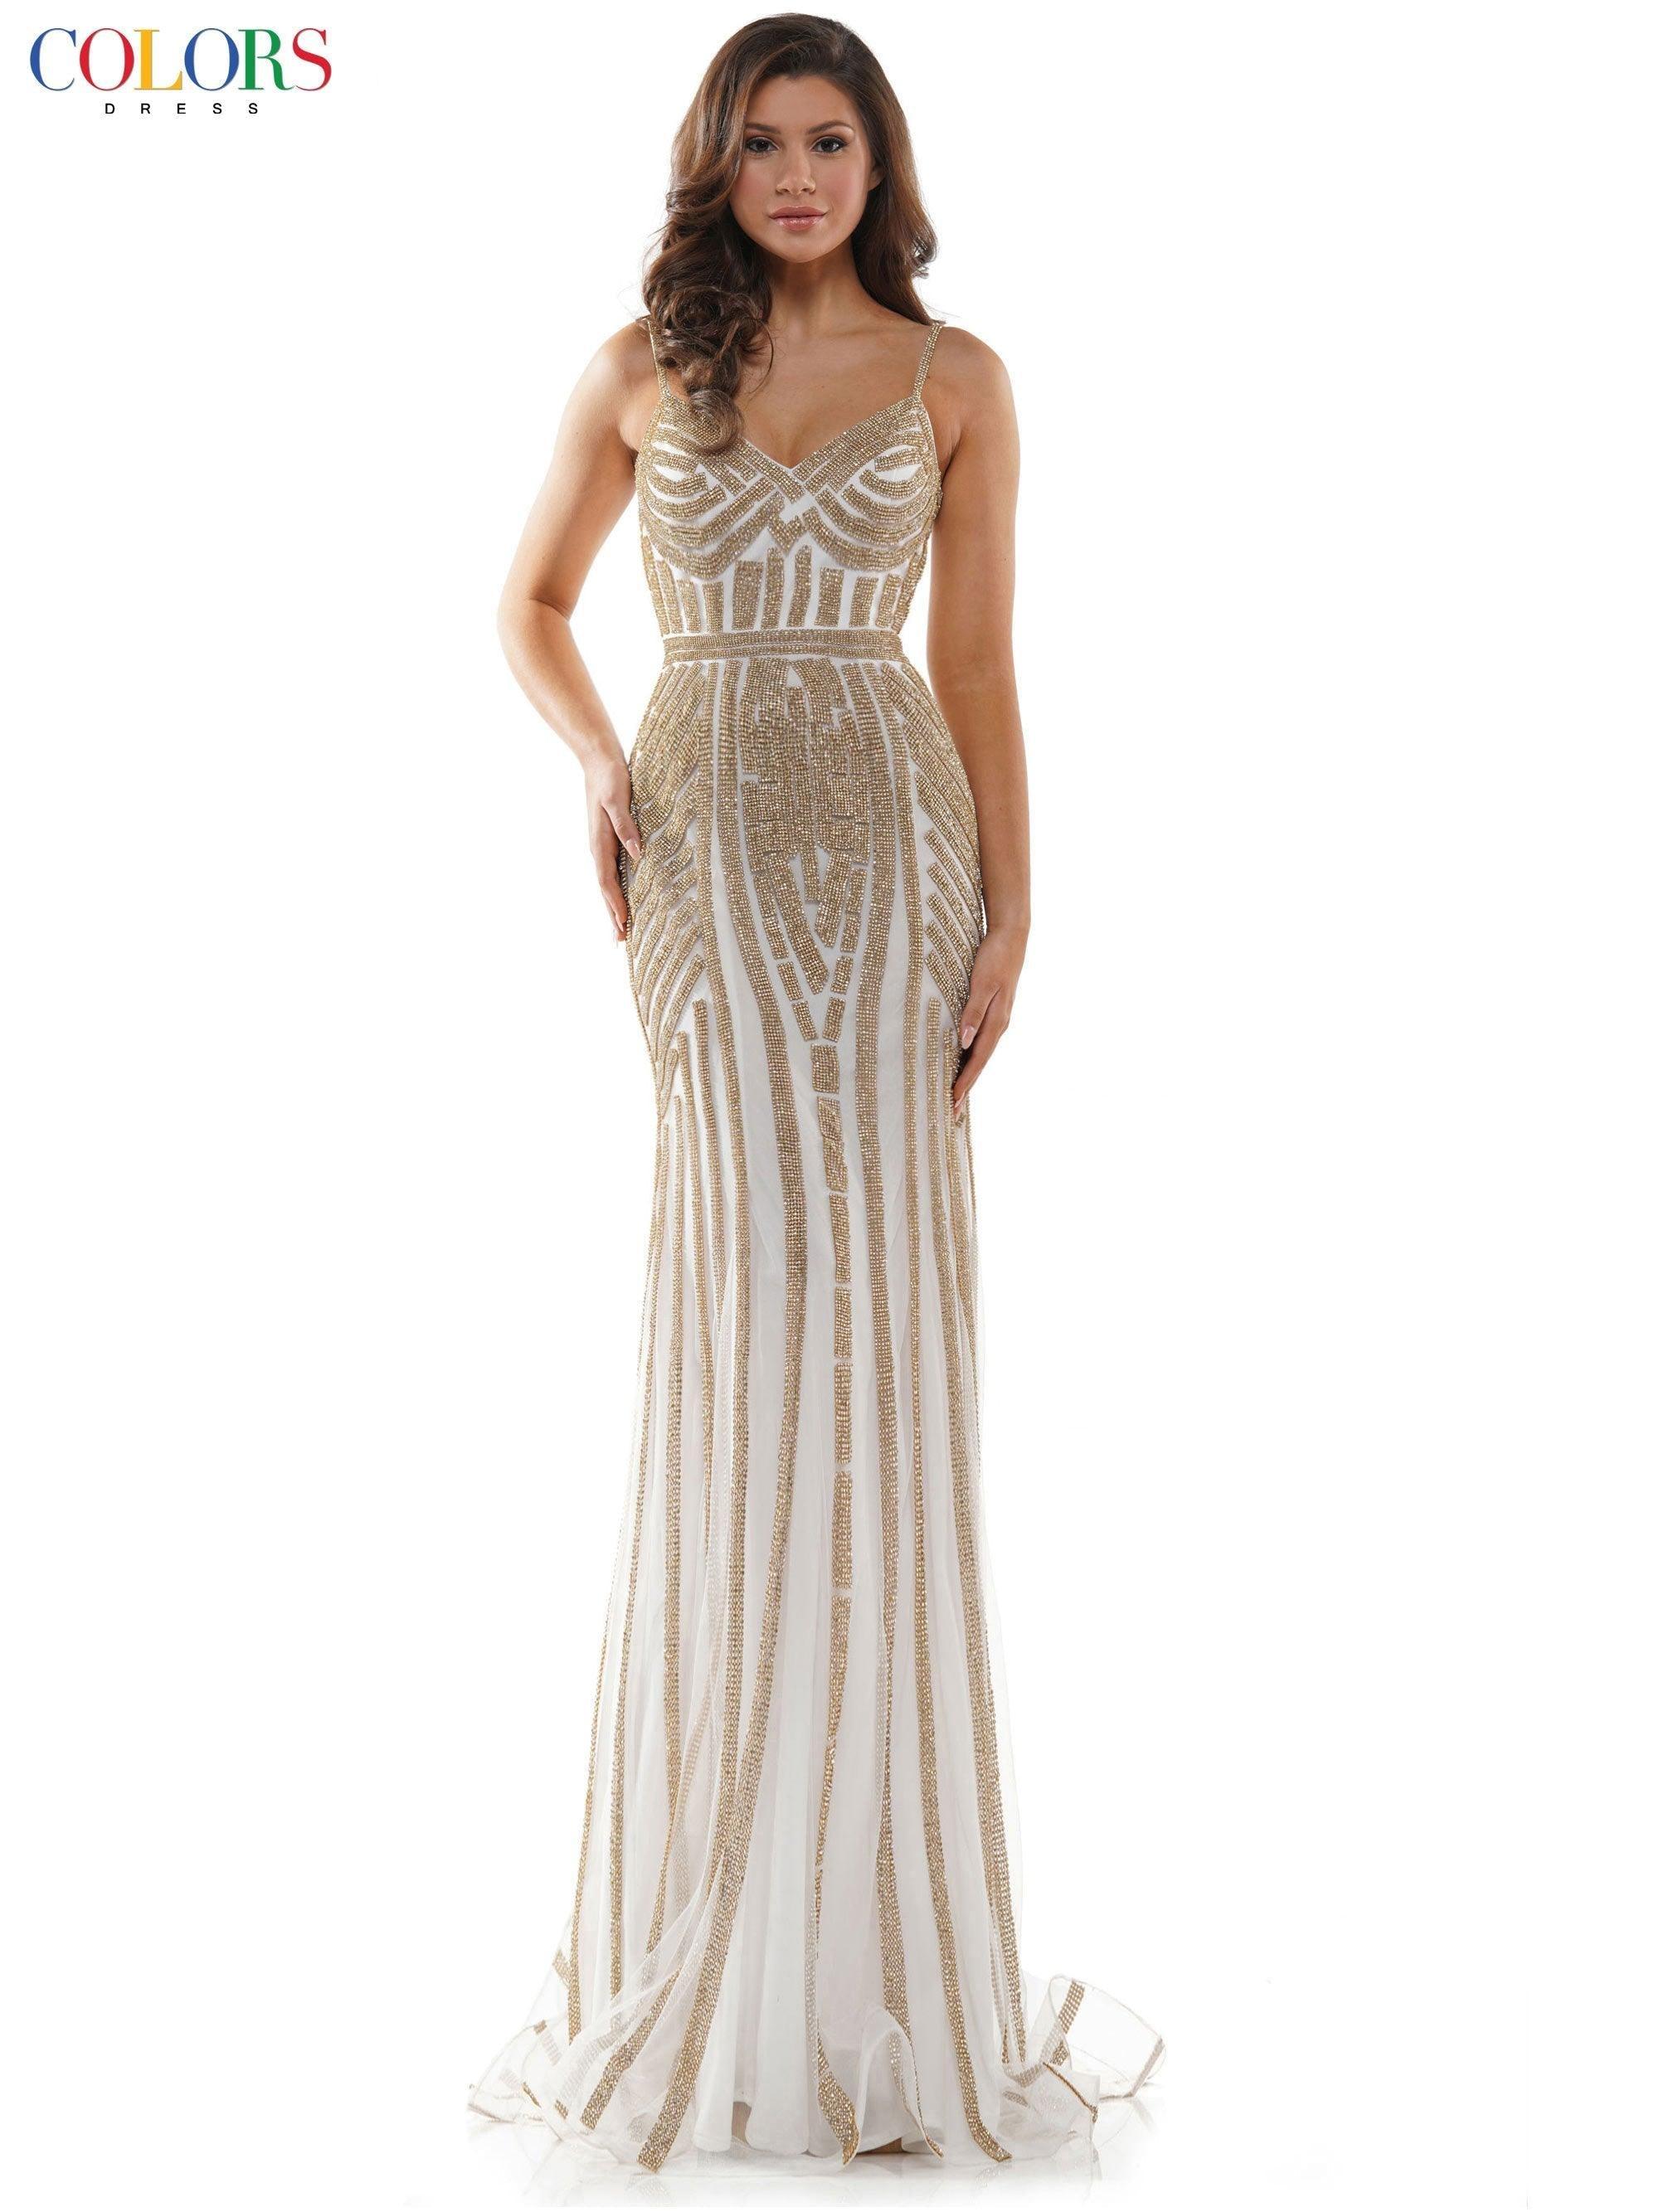 Colors Prom Long Formal Beaded Gown 664 - The Dress Outlet